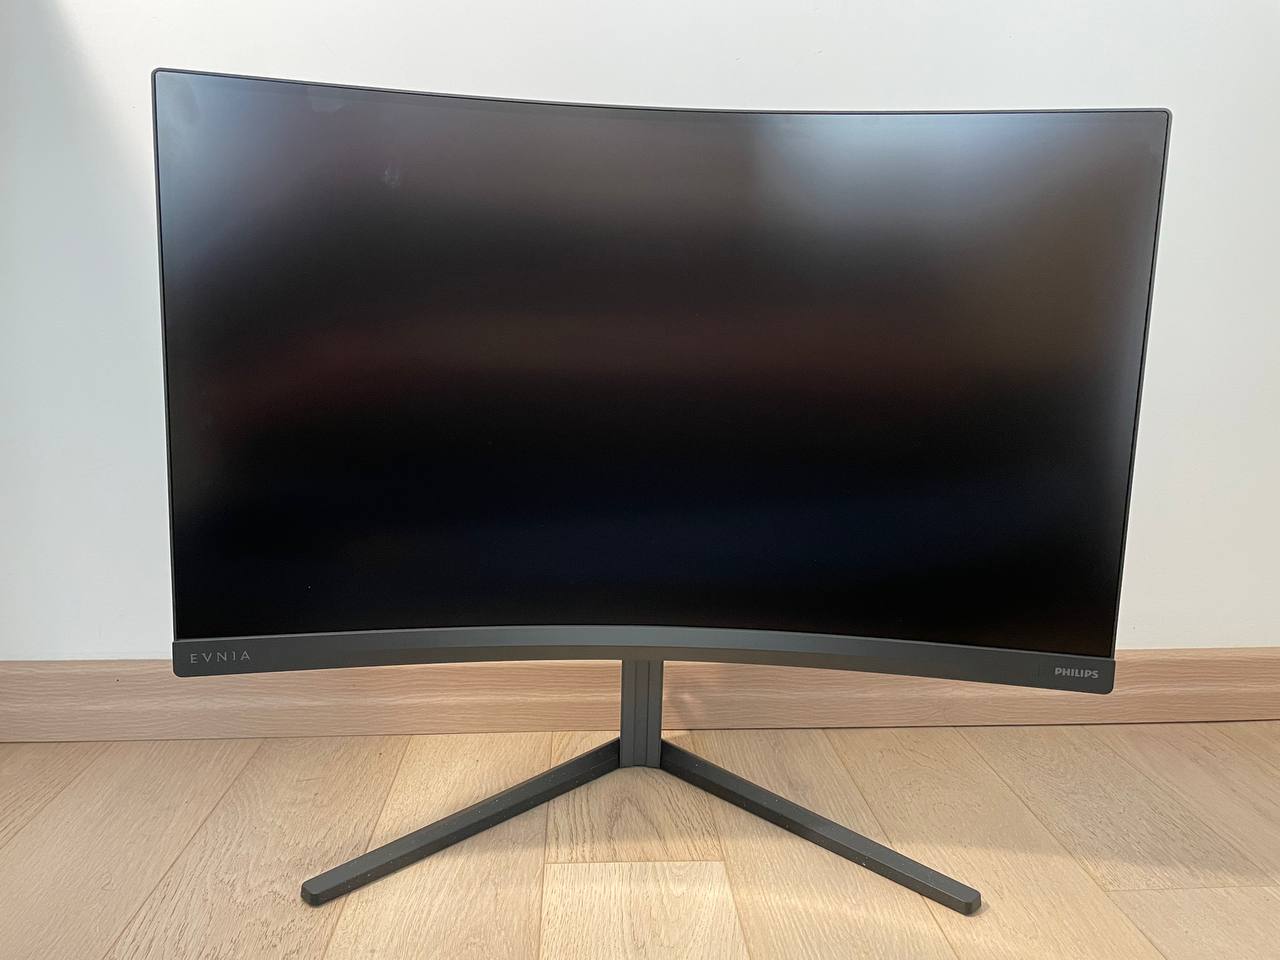 Philips Evnia 27M2C5500W review: a 2K monitor with a high refresh rate